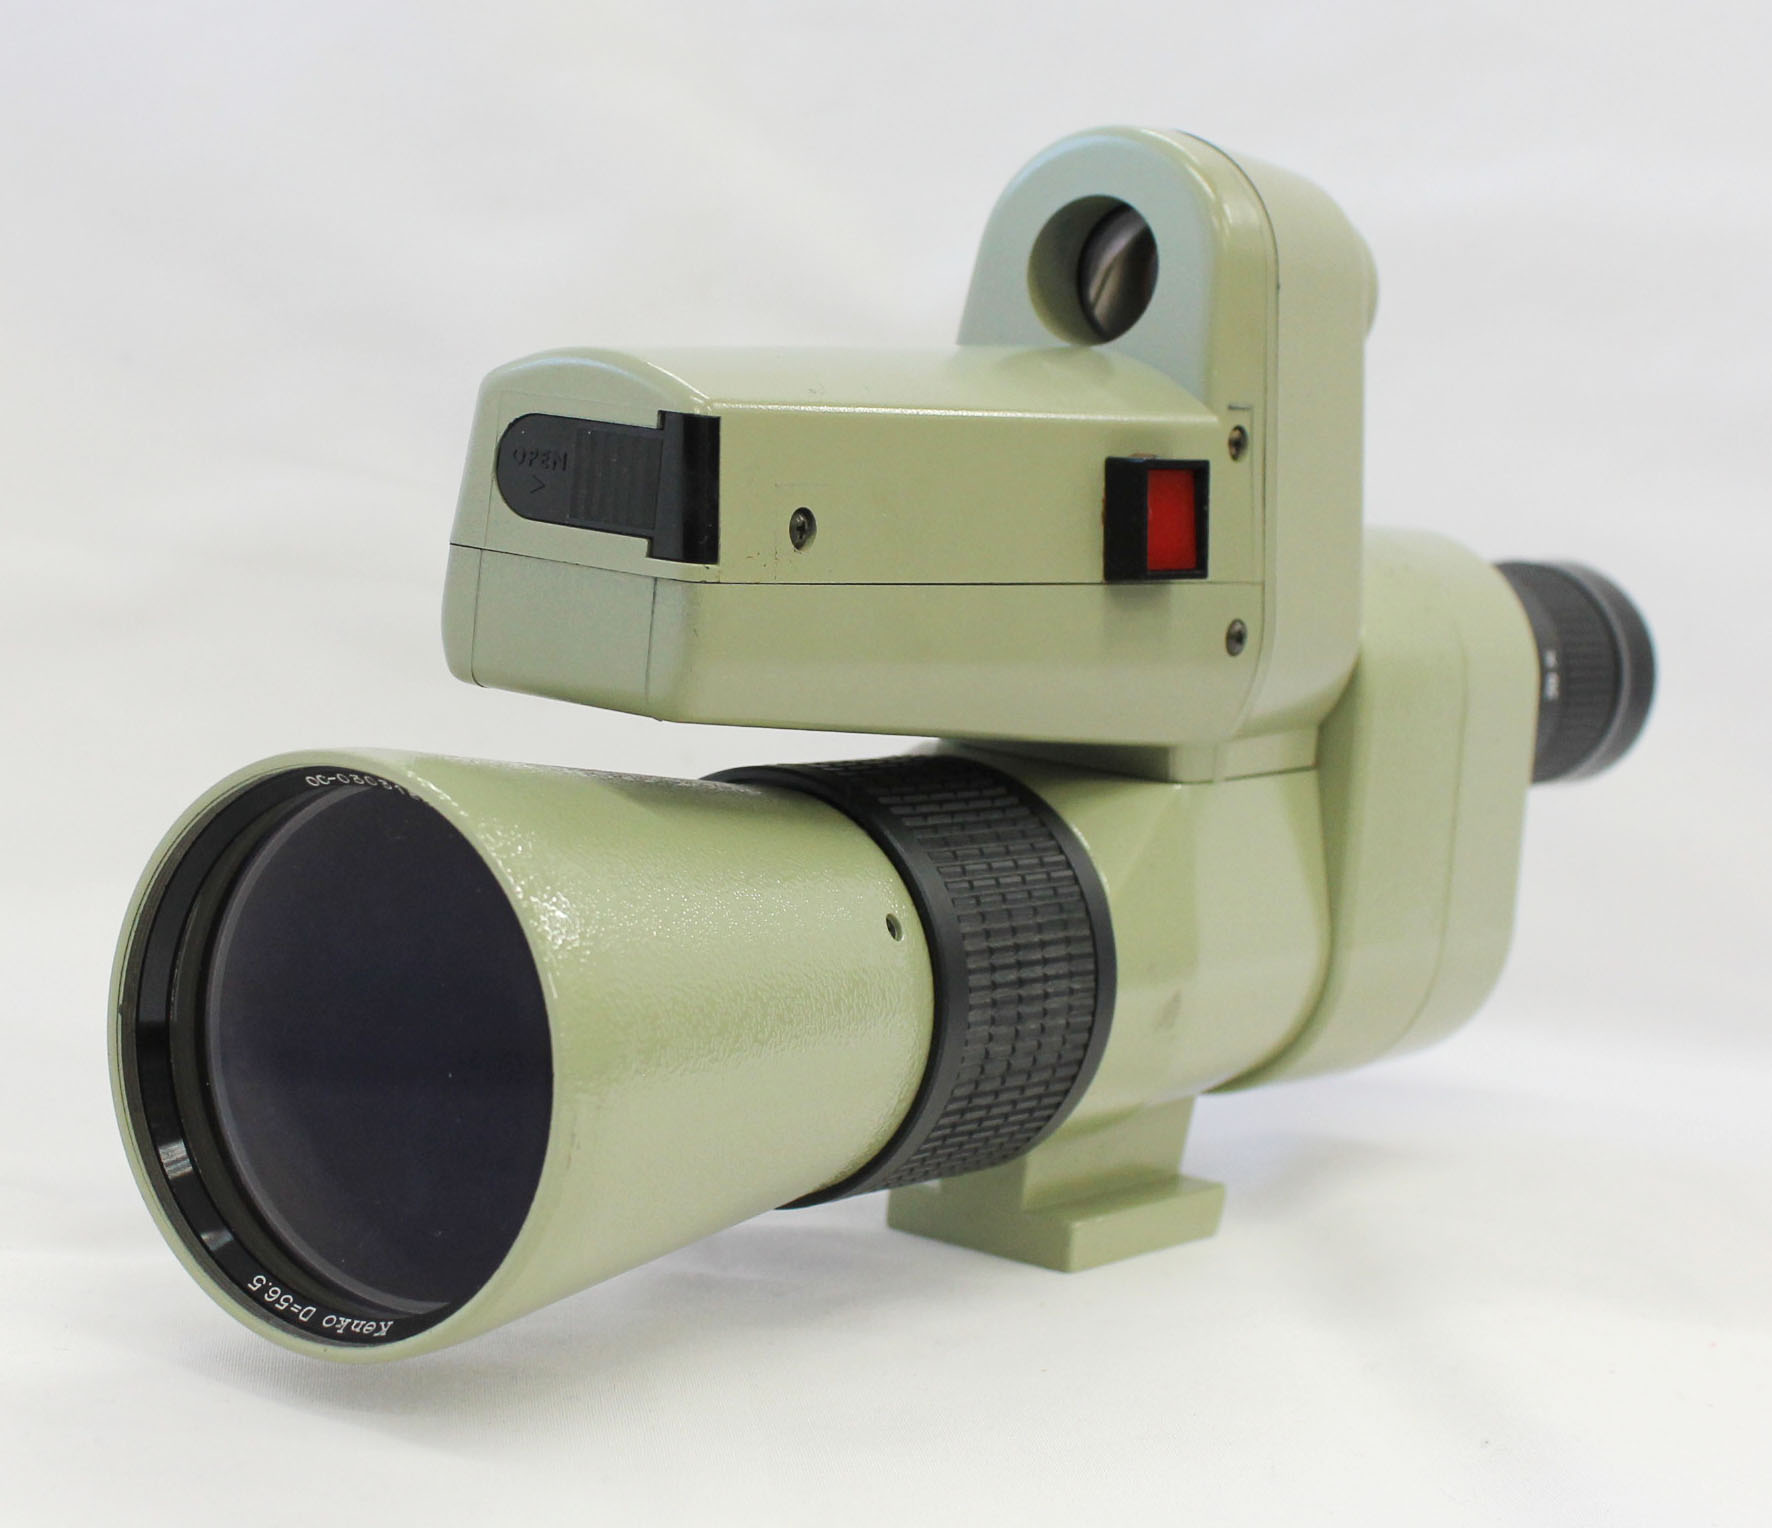 Kenko Find Scope Spotting Scope 20x D=56.5 with LED Aiming View Finder in Case / Box from Japan Photo 1